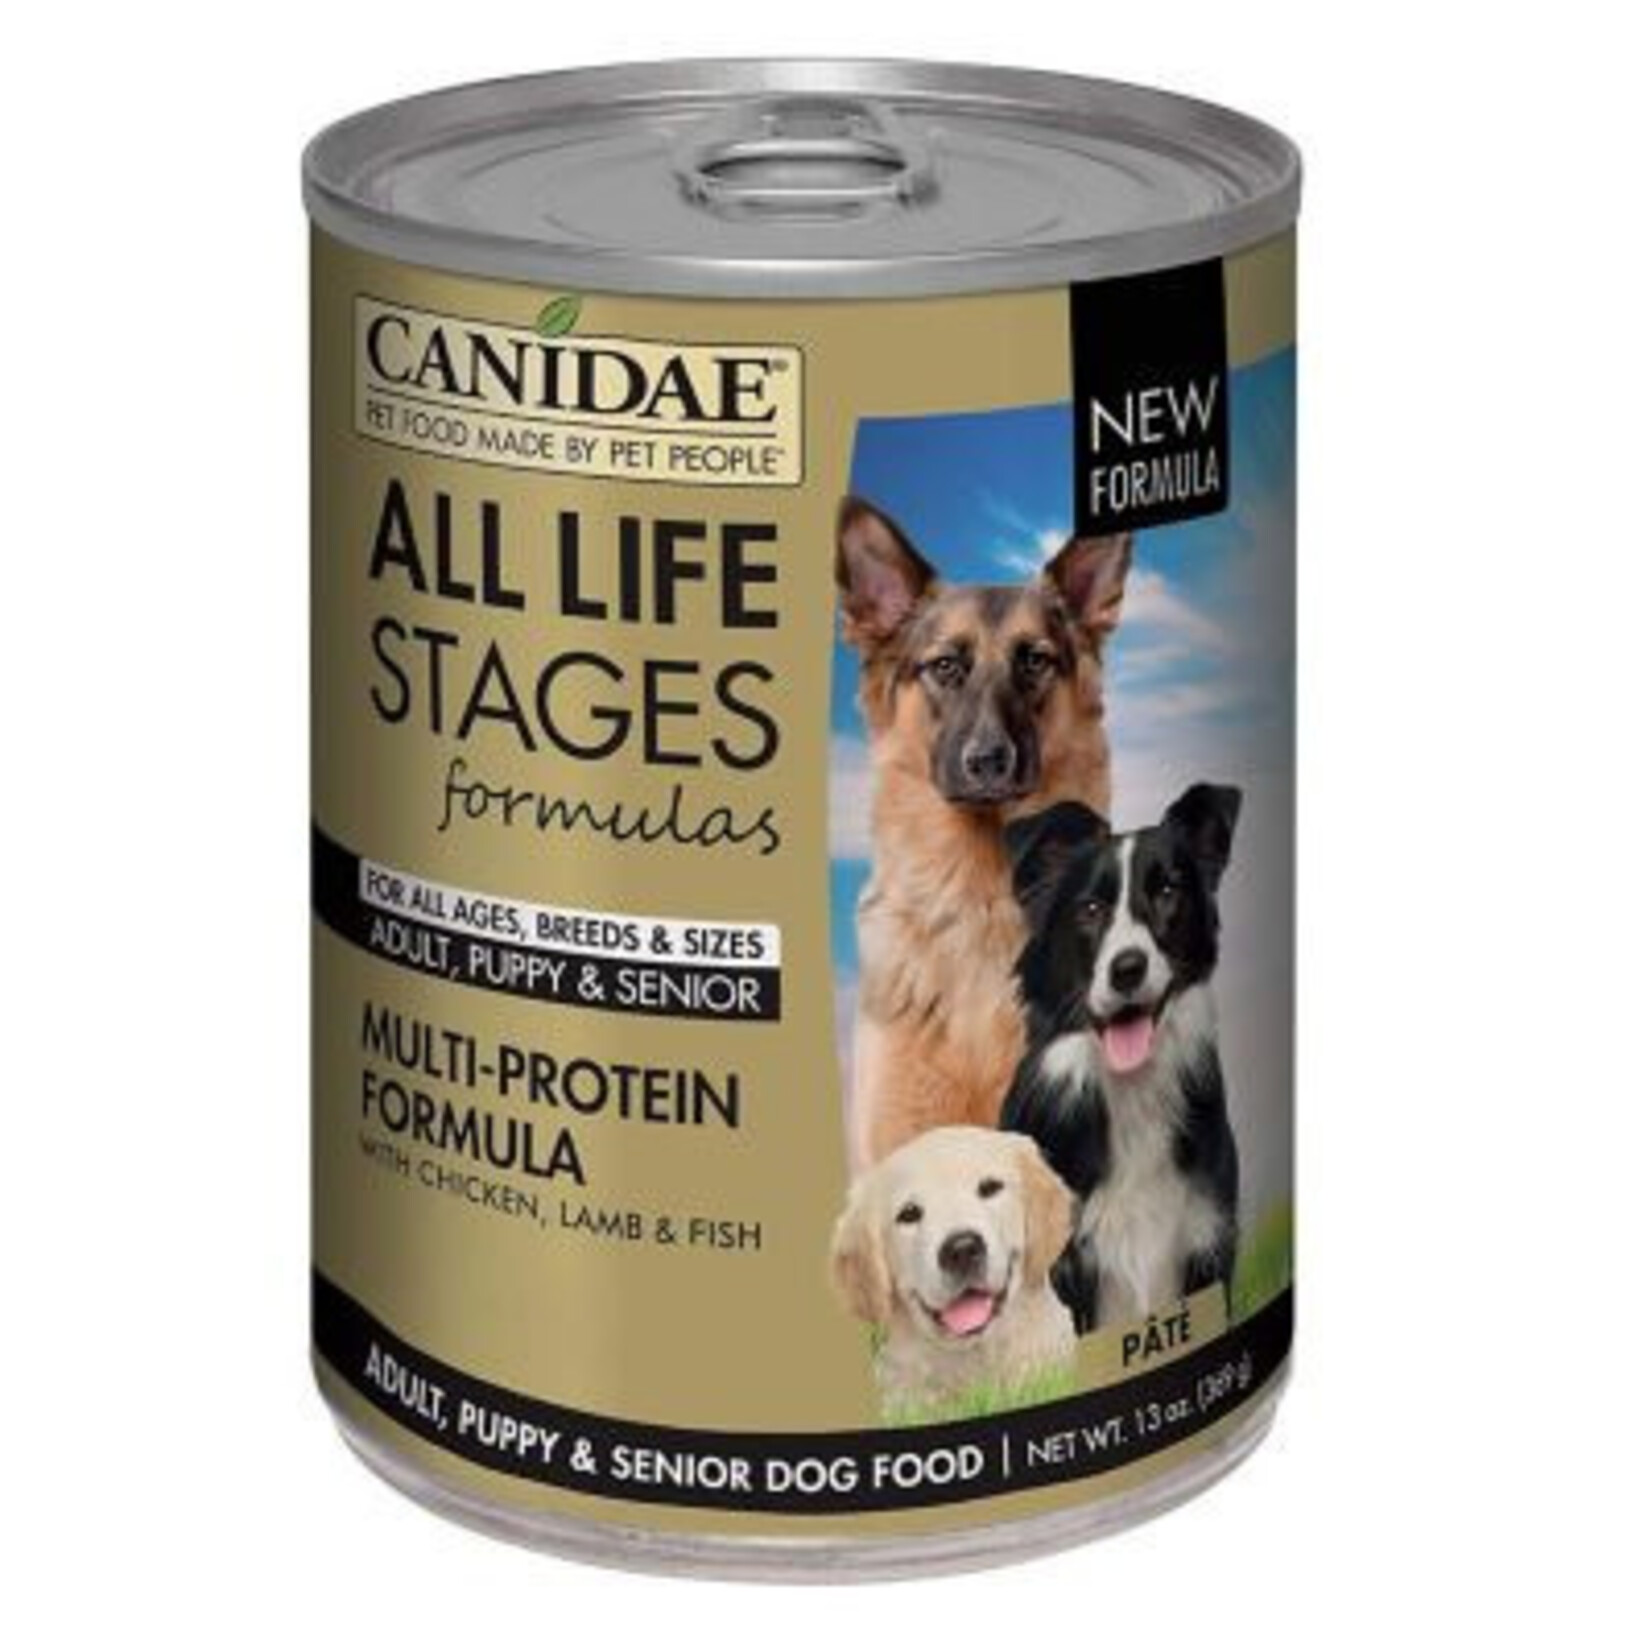 Canidae Canidae All Life Stages 13oz Canned Dog Food